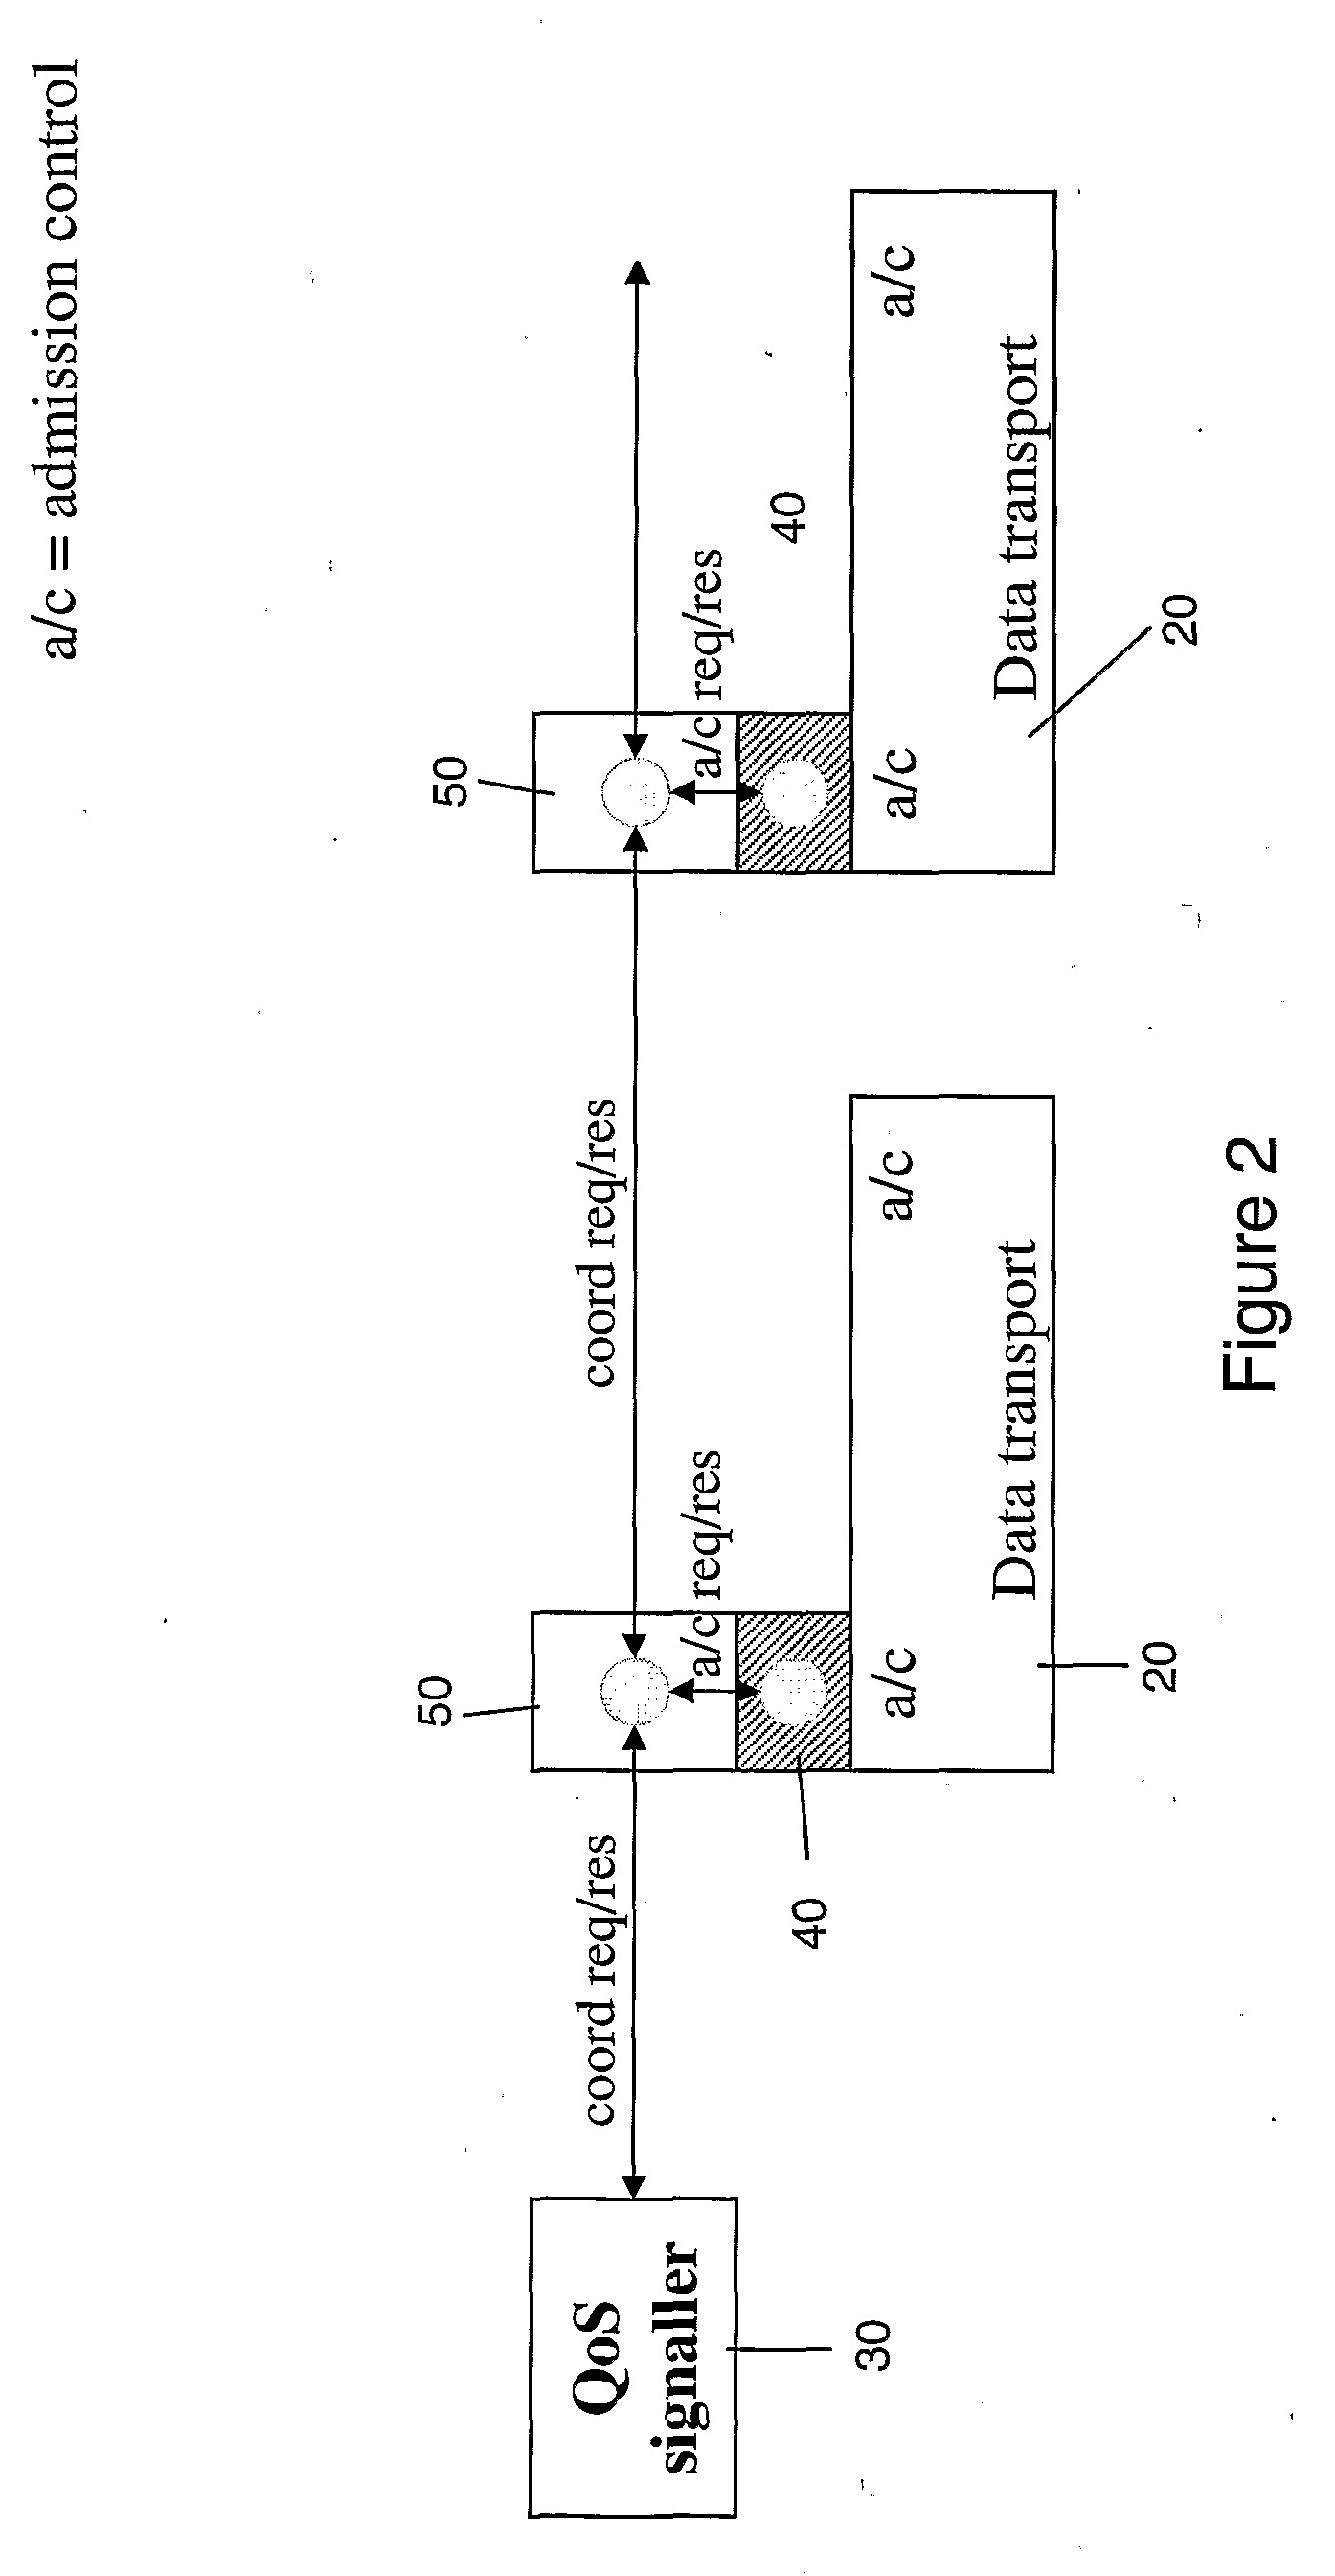 Method and system for coordination of admission control in transport networks